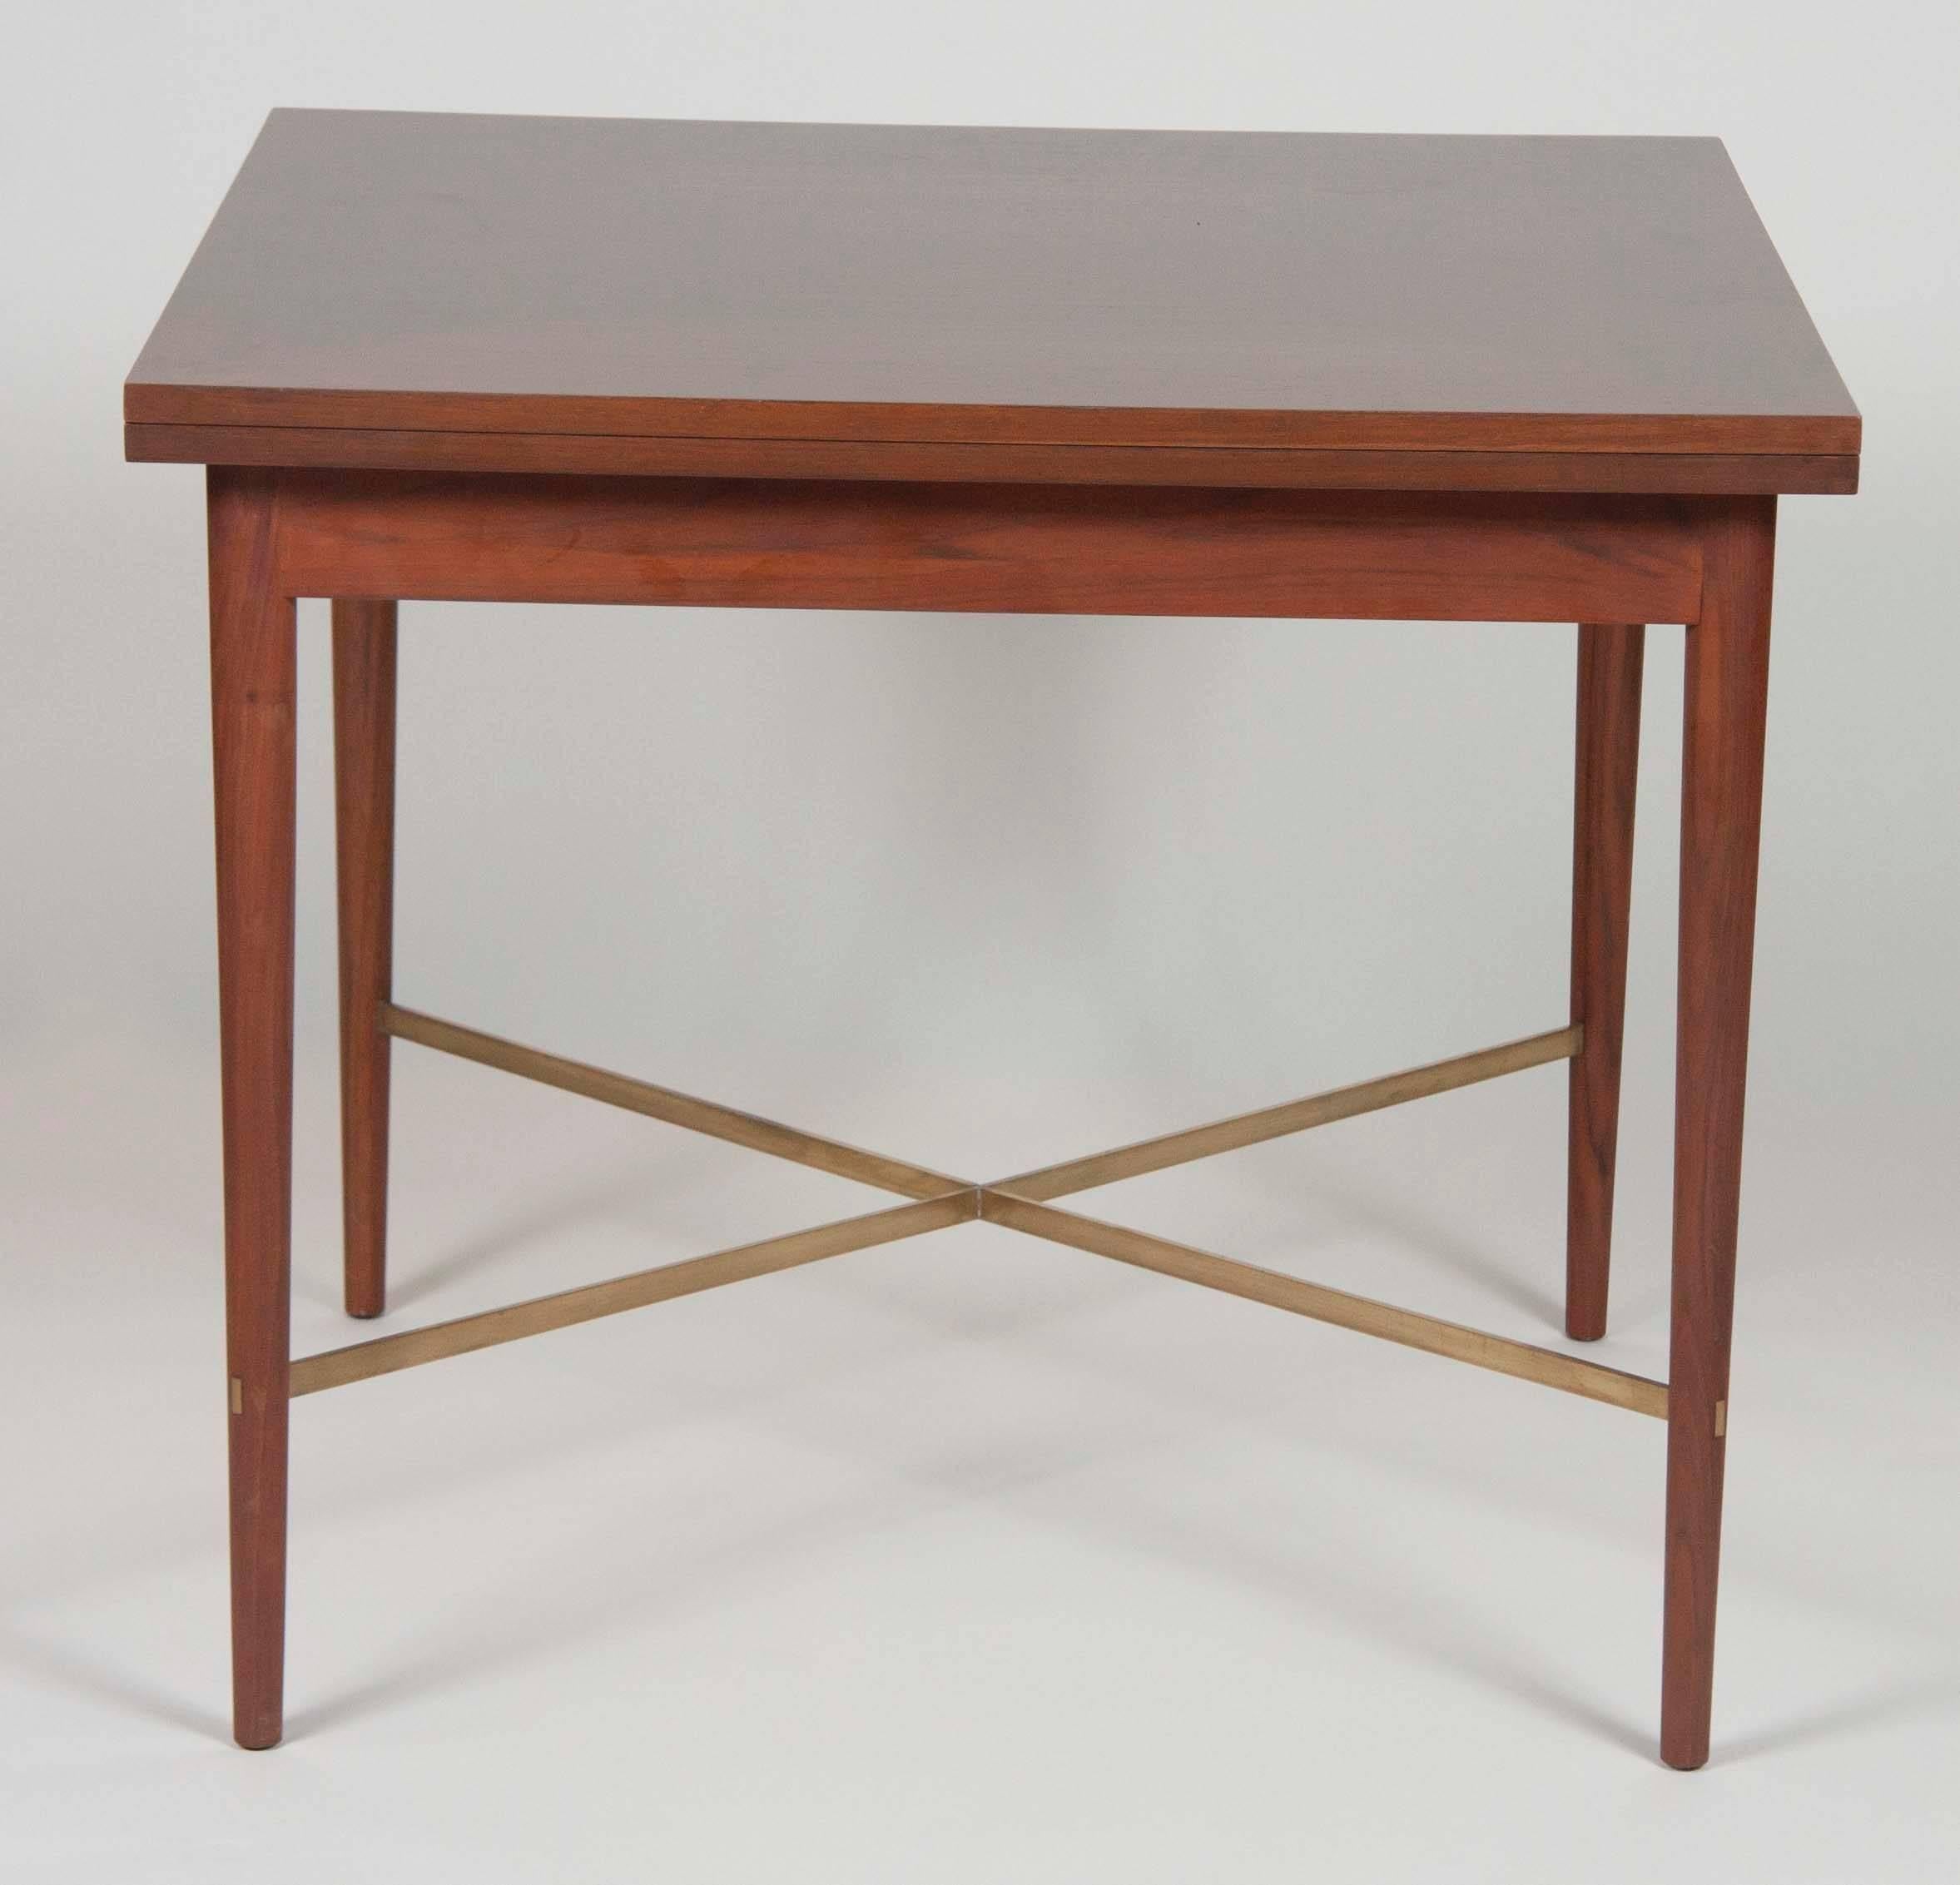 A Paul McCobb walnut card table with folding top. Top opens to be 68 1/4."